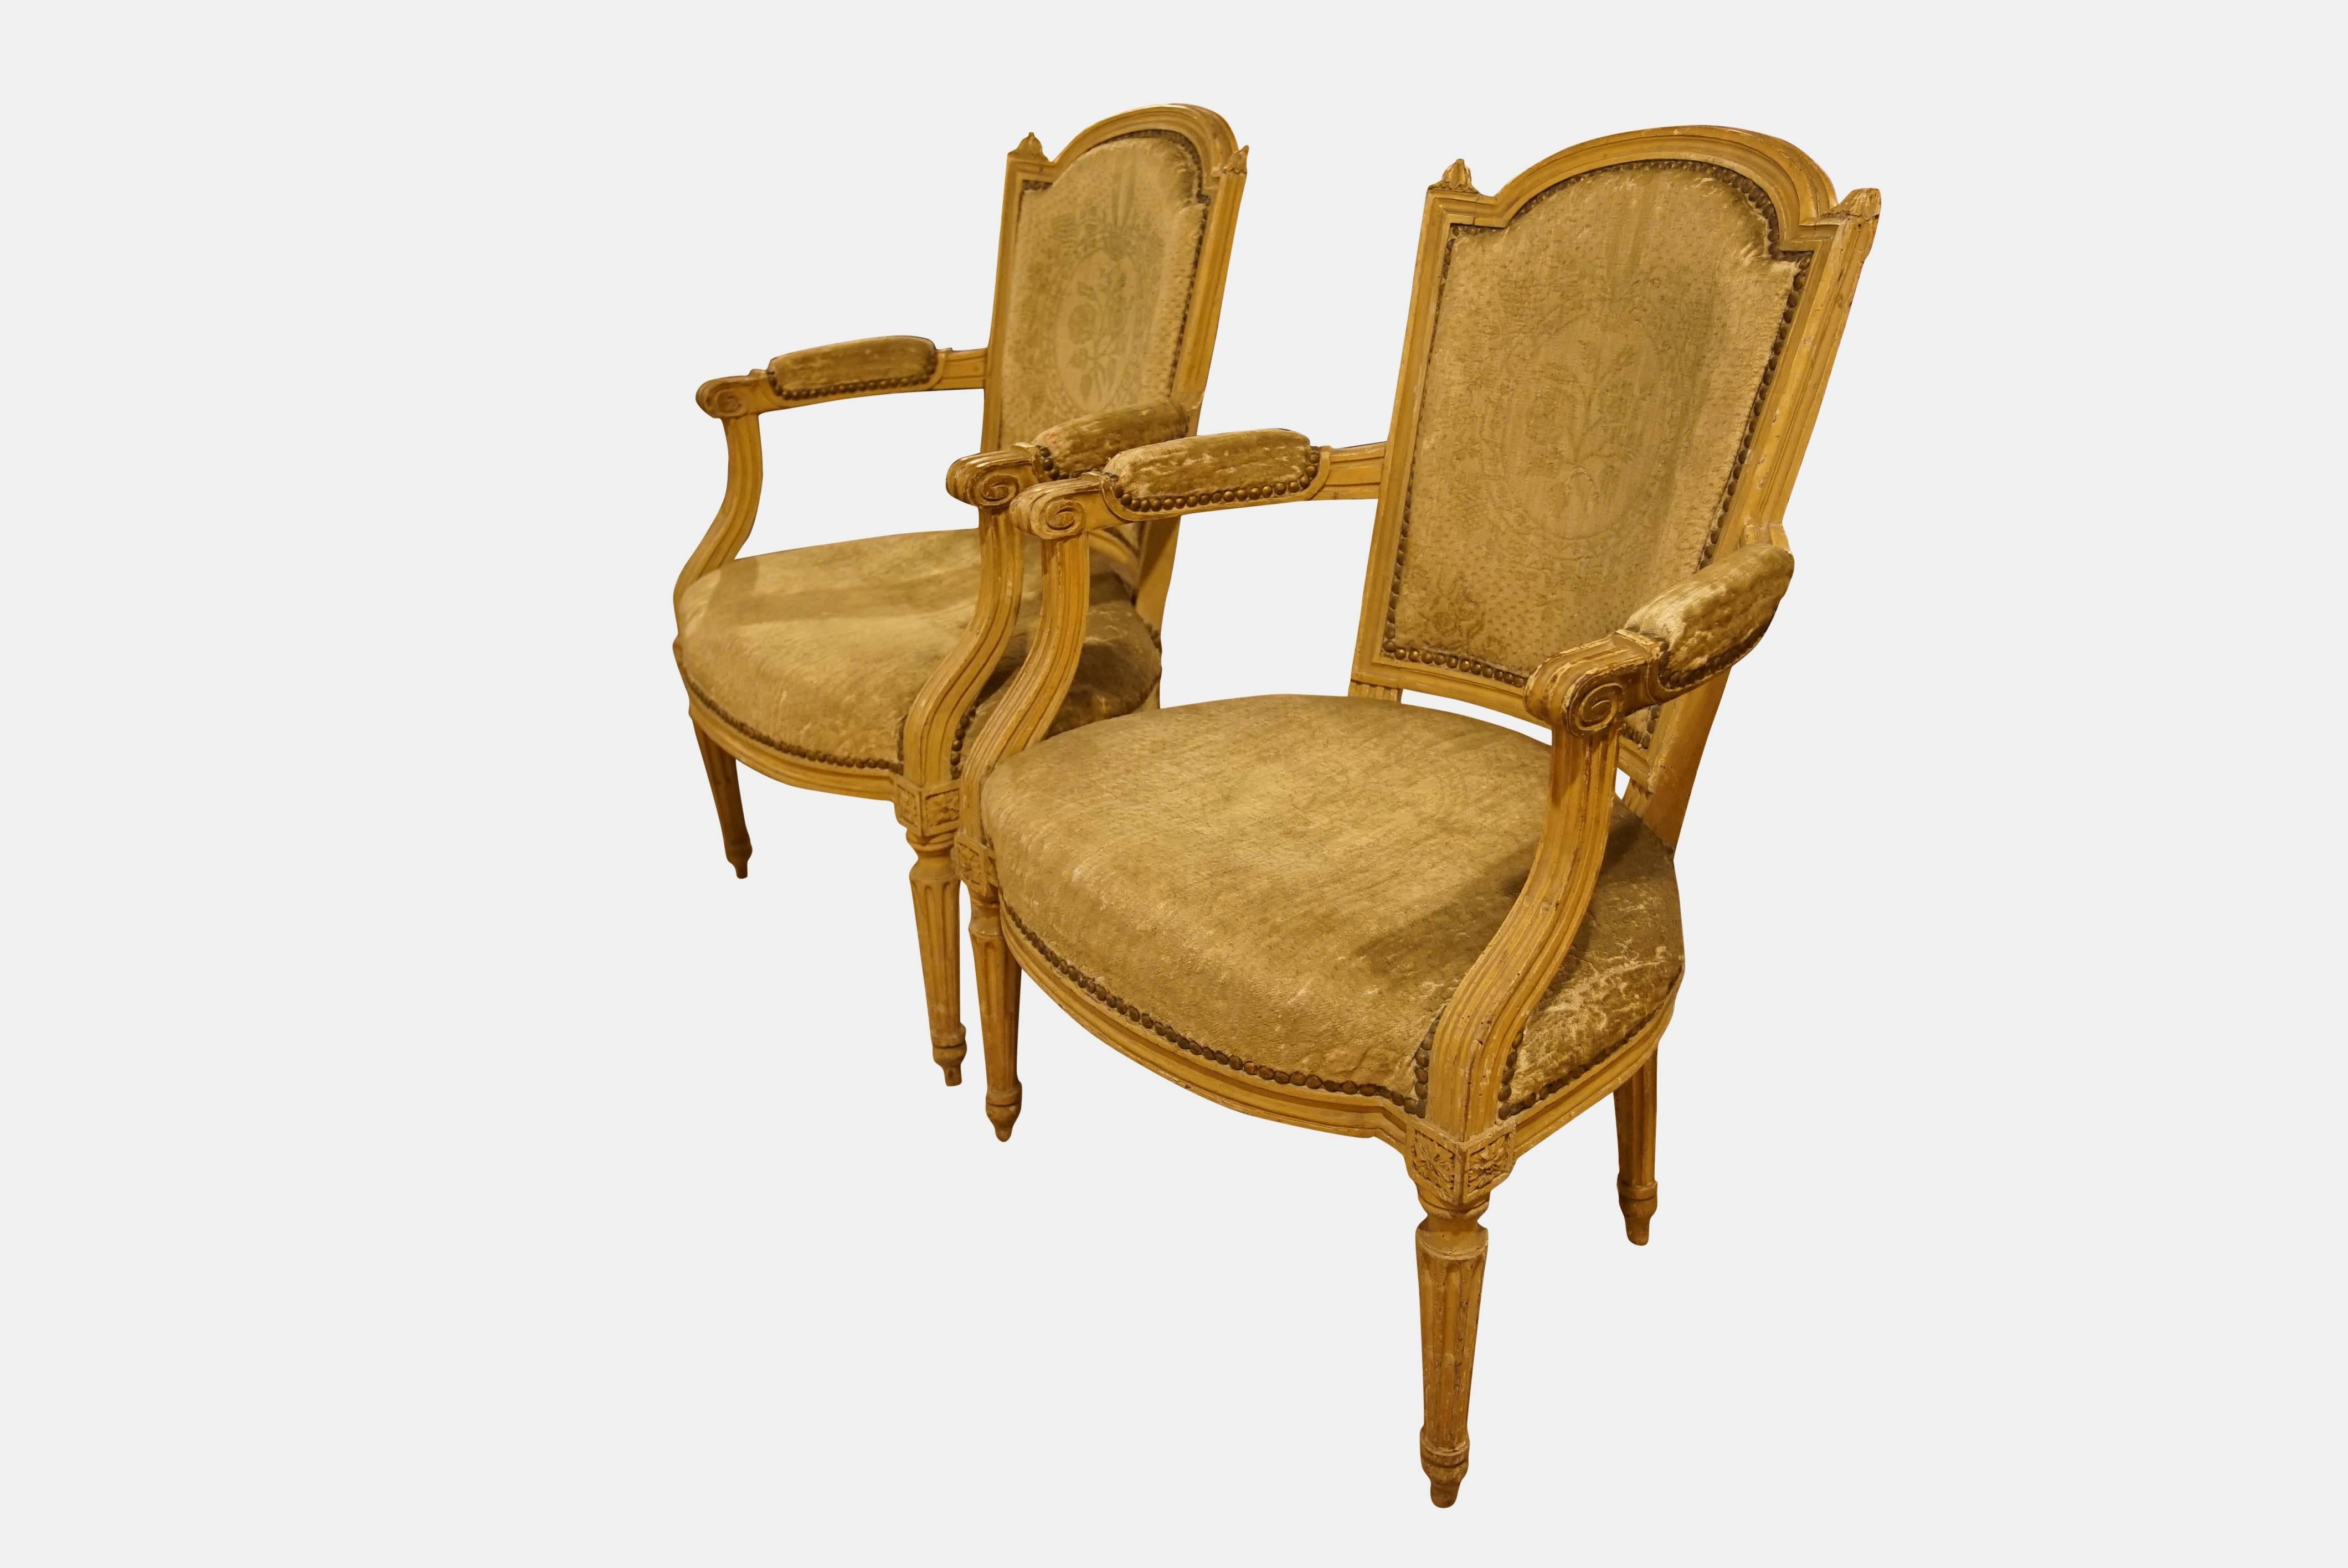 A pair of late 19th century Shabby Chic French Salon chairs with worn and faded upholstery commensurate with age.

Two pairs available.

